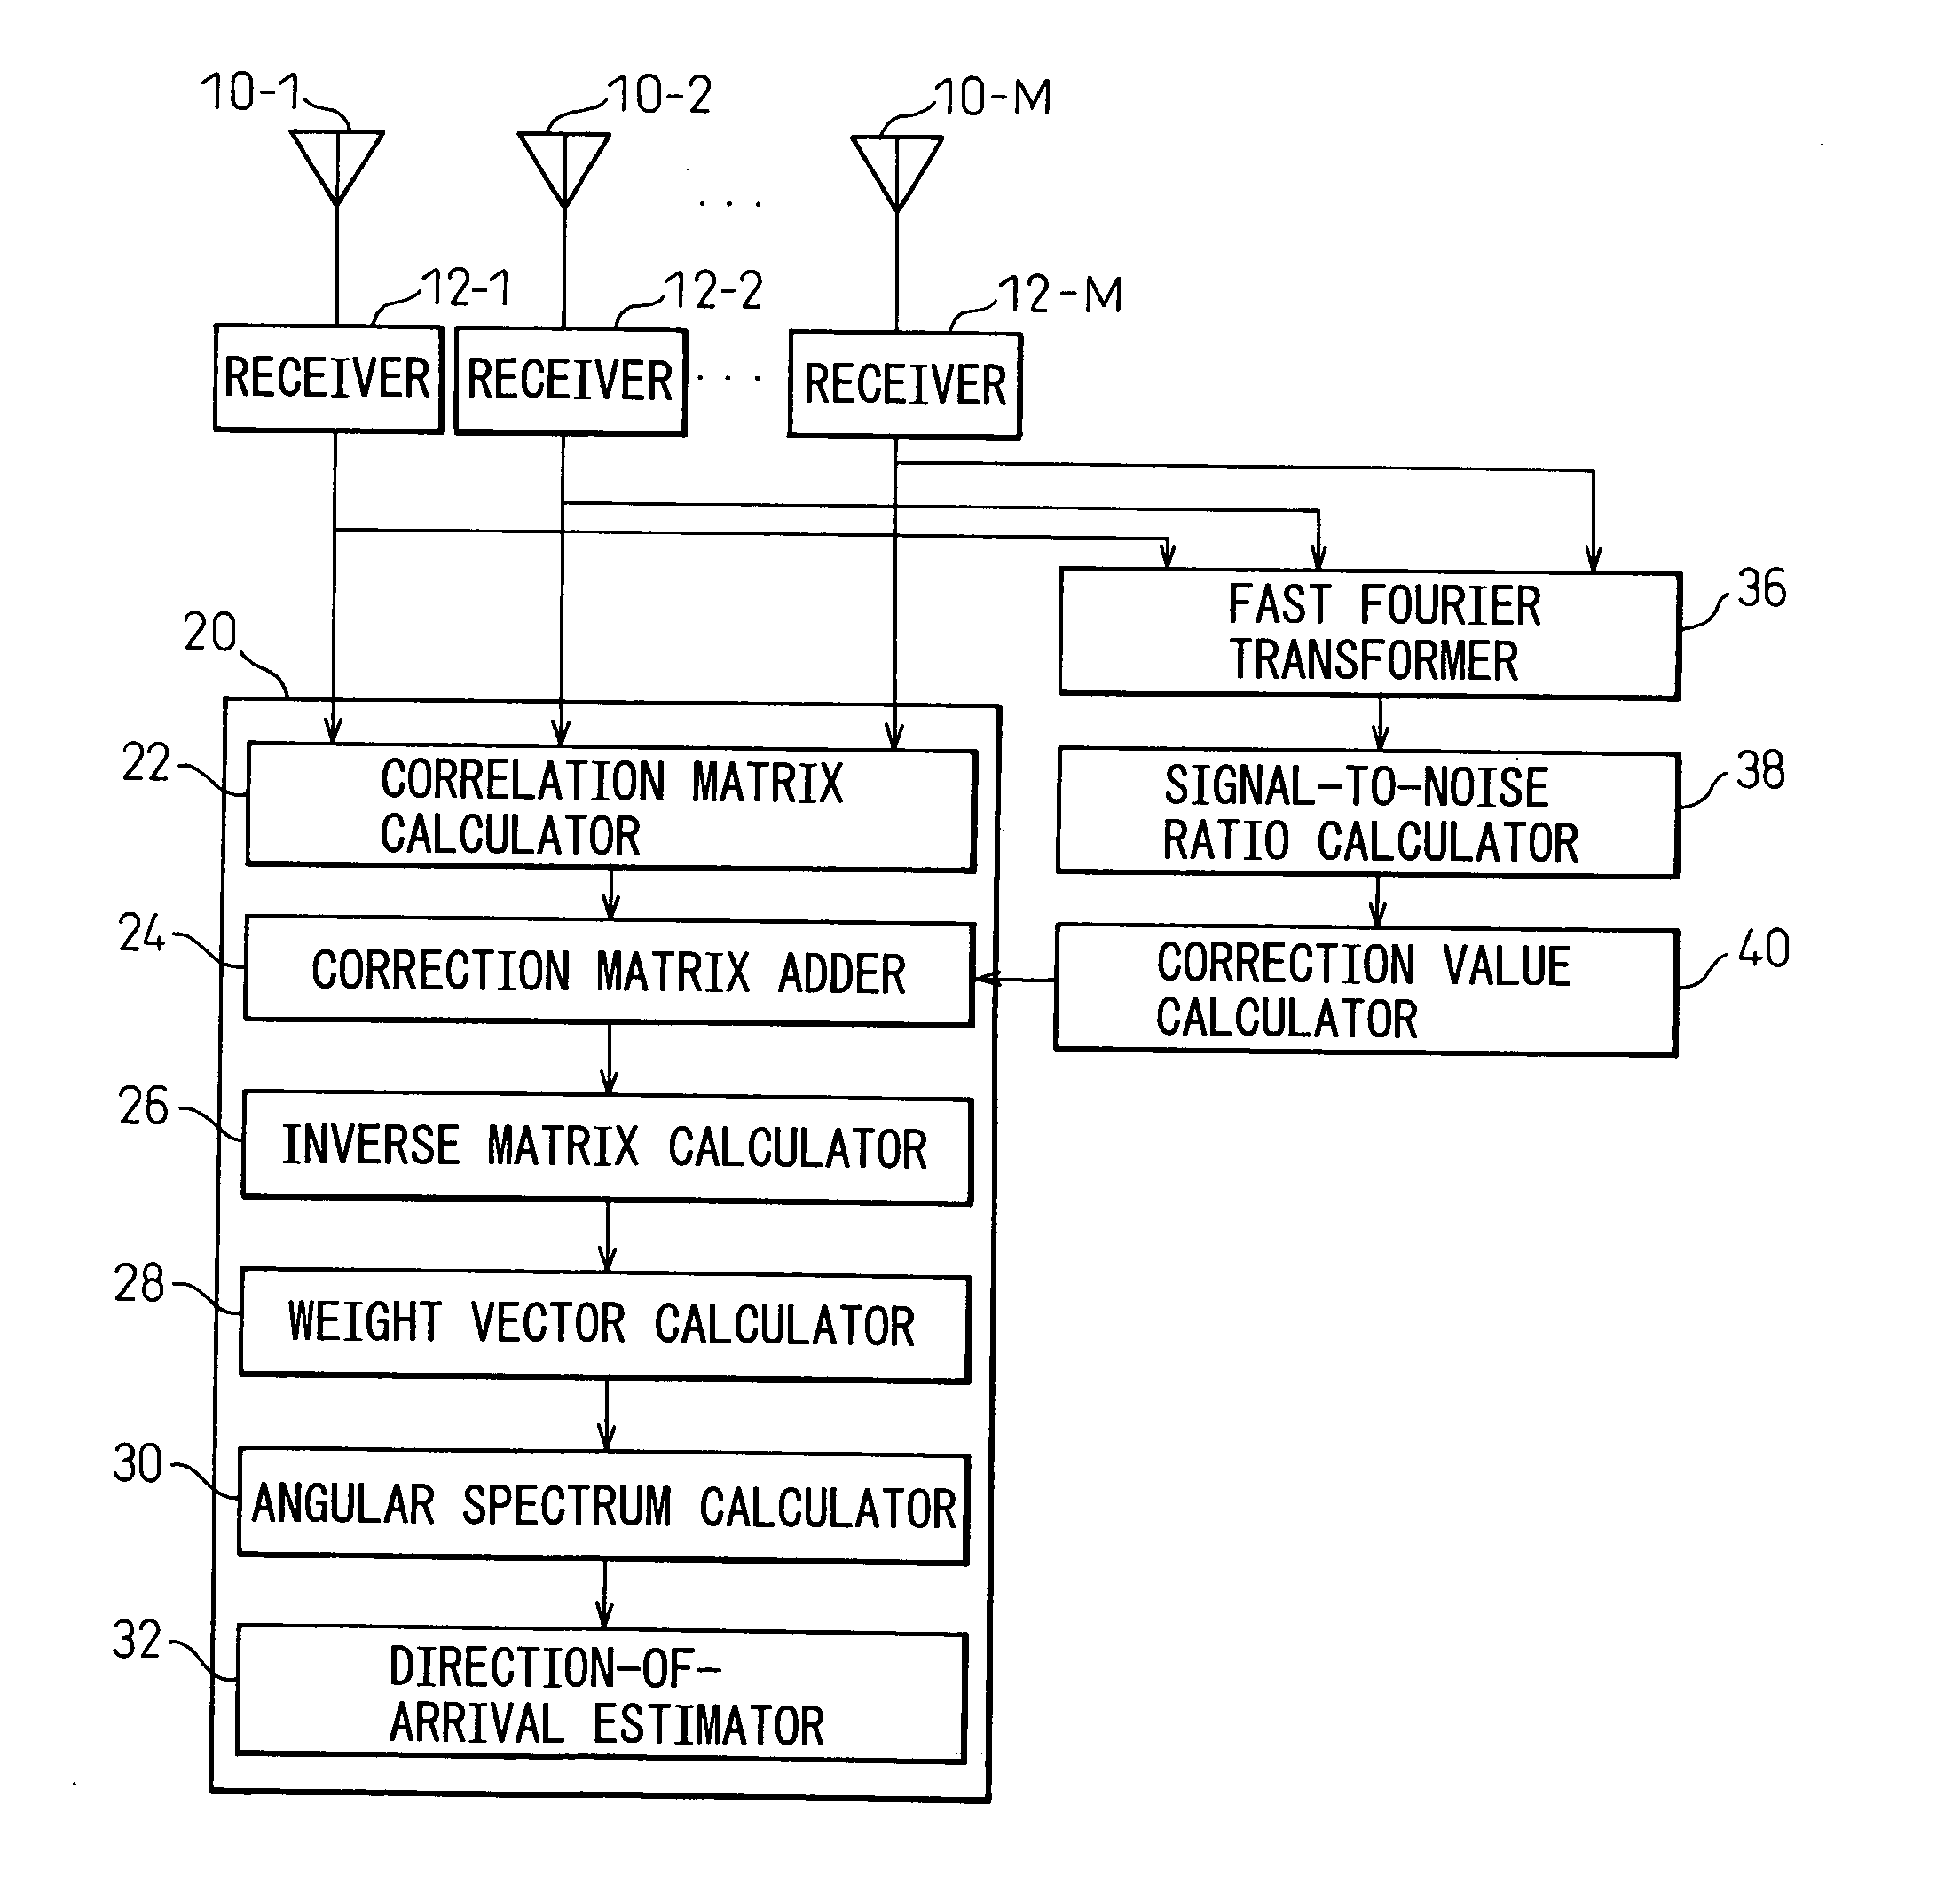 Apparatus and method for estimating direction of arrival of radio wave